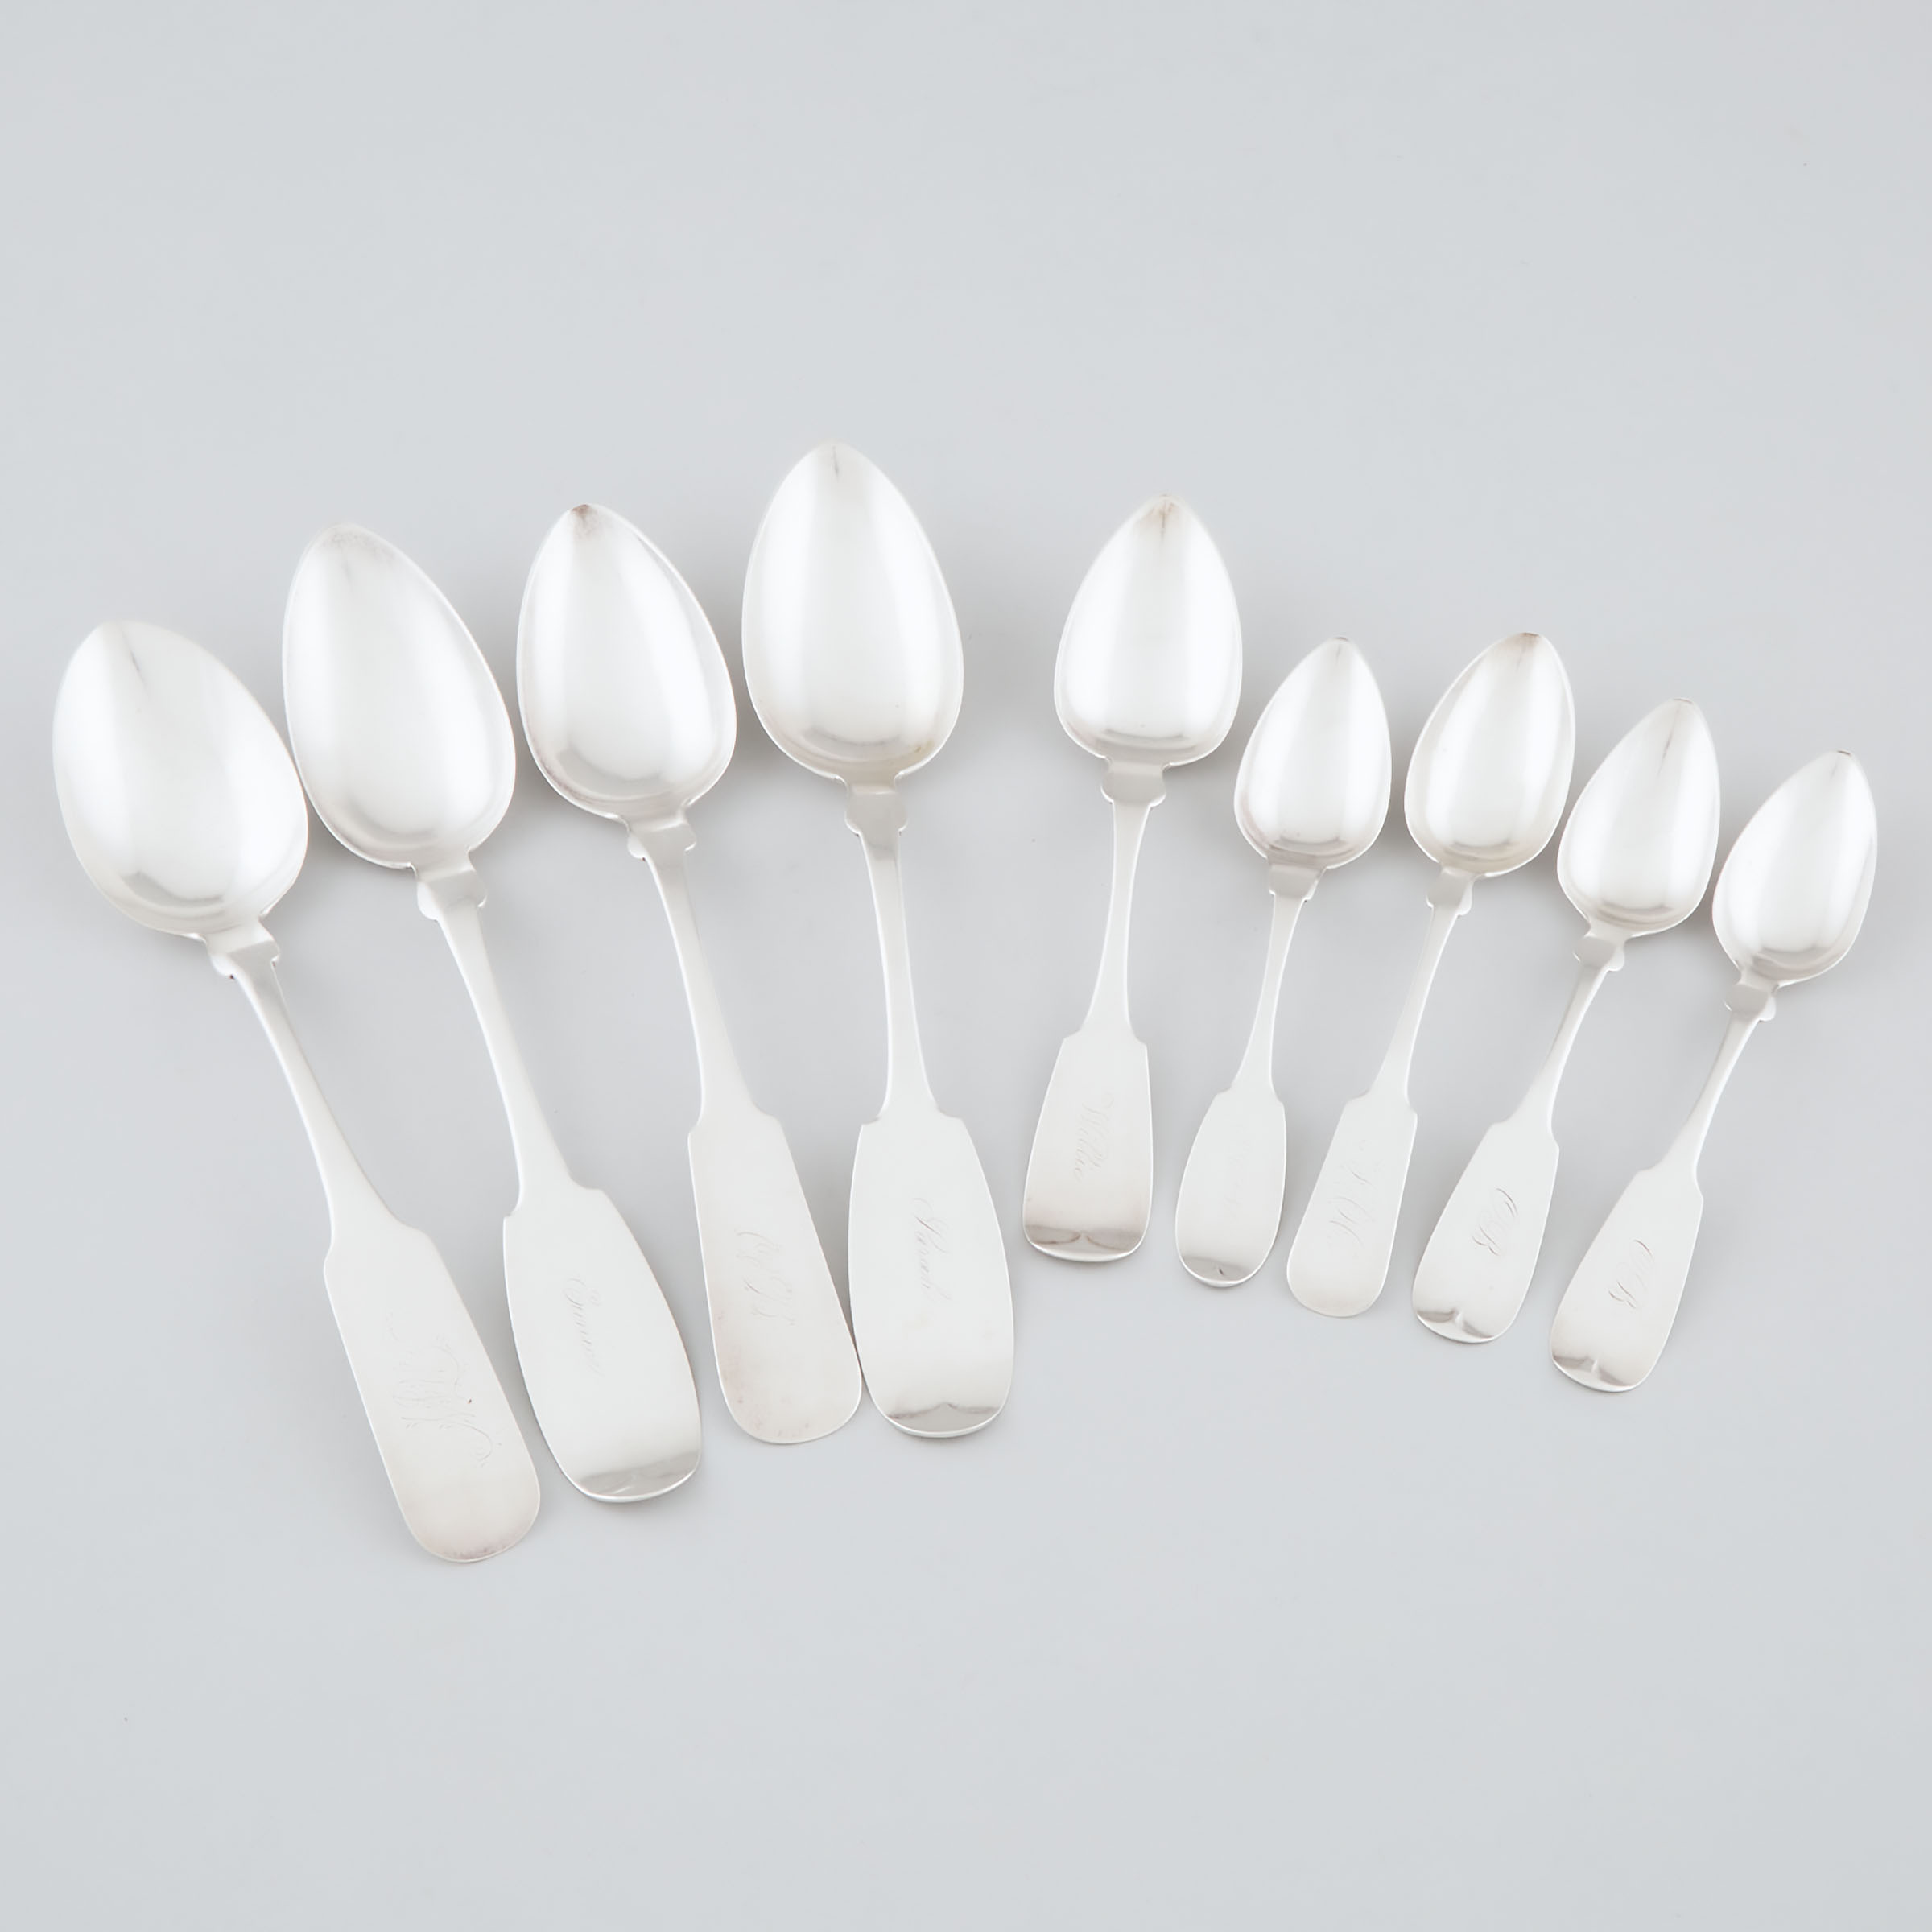 Four American Silver Fiddle Pattern Table Spoons, a Dessert Spoon and Four Tea Spoons, 19th century